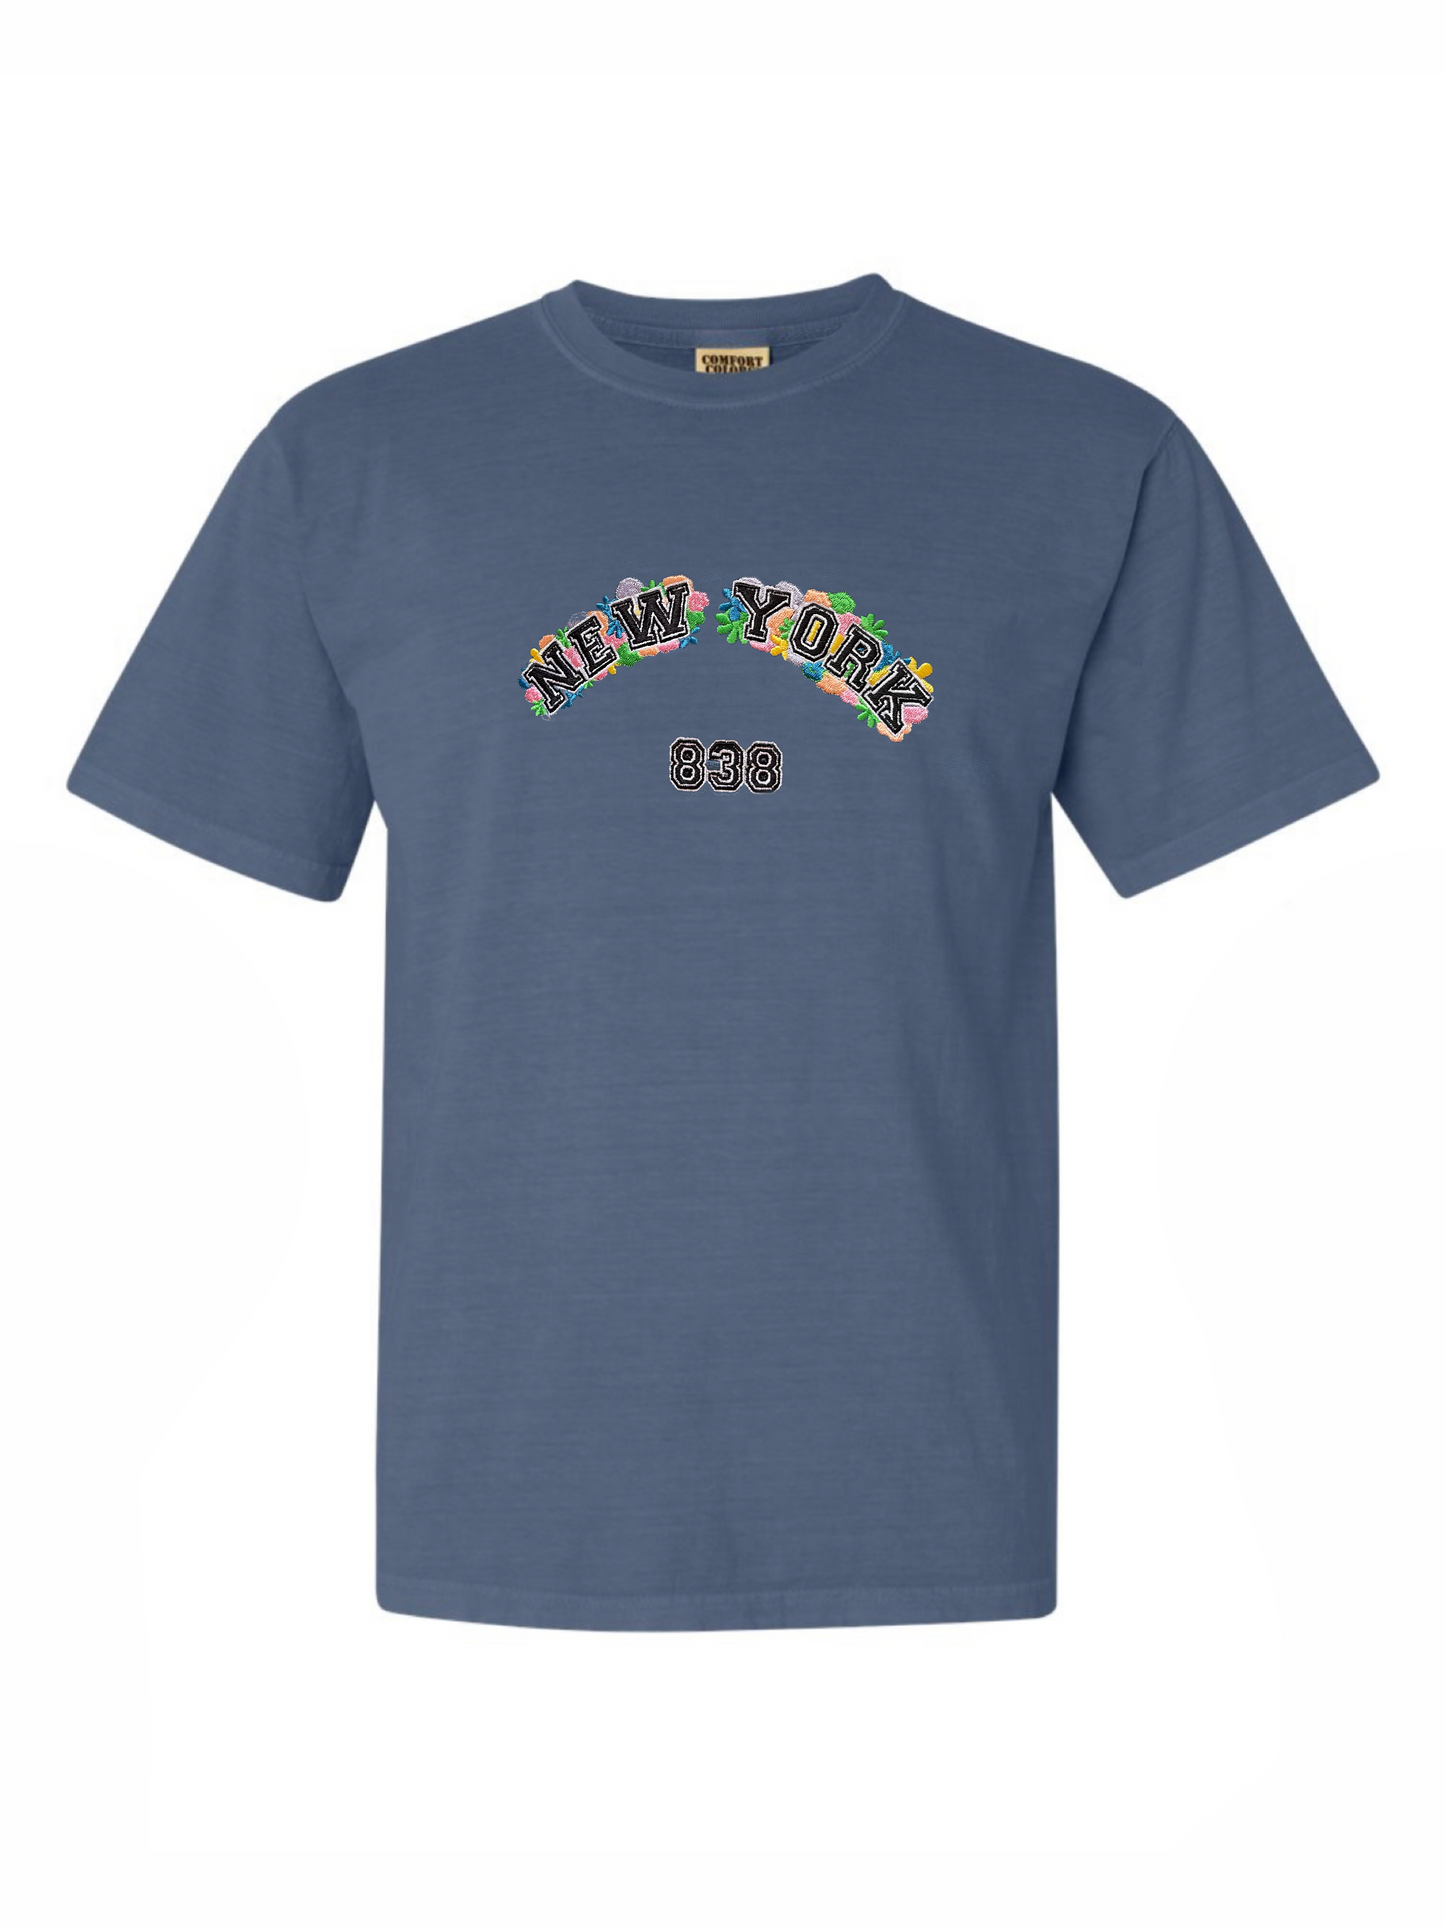 New York 838 embroidered T-SHIRT